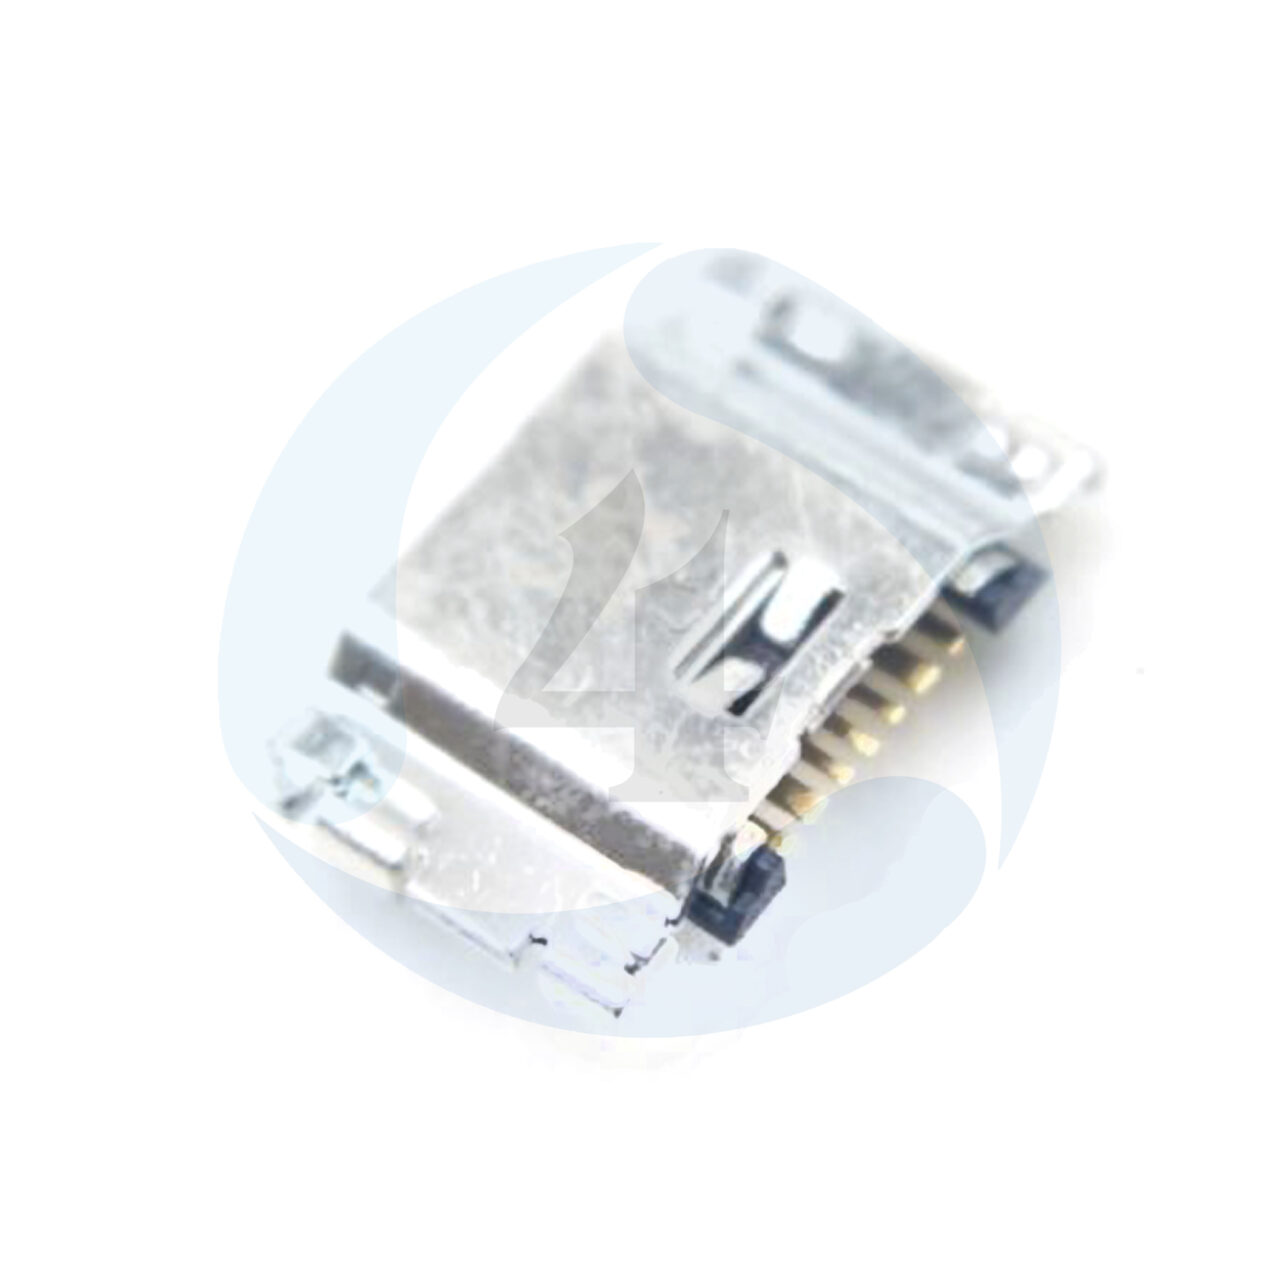 Samsung galaxy J400 J4 2018 charger connector